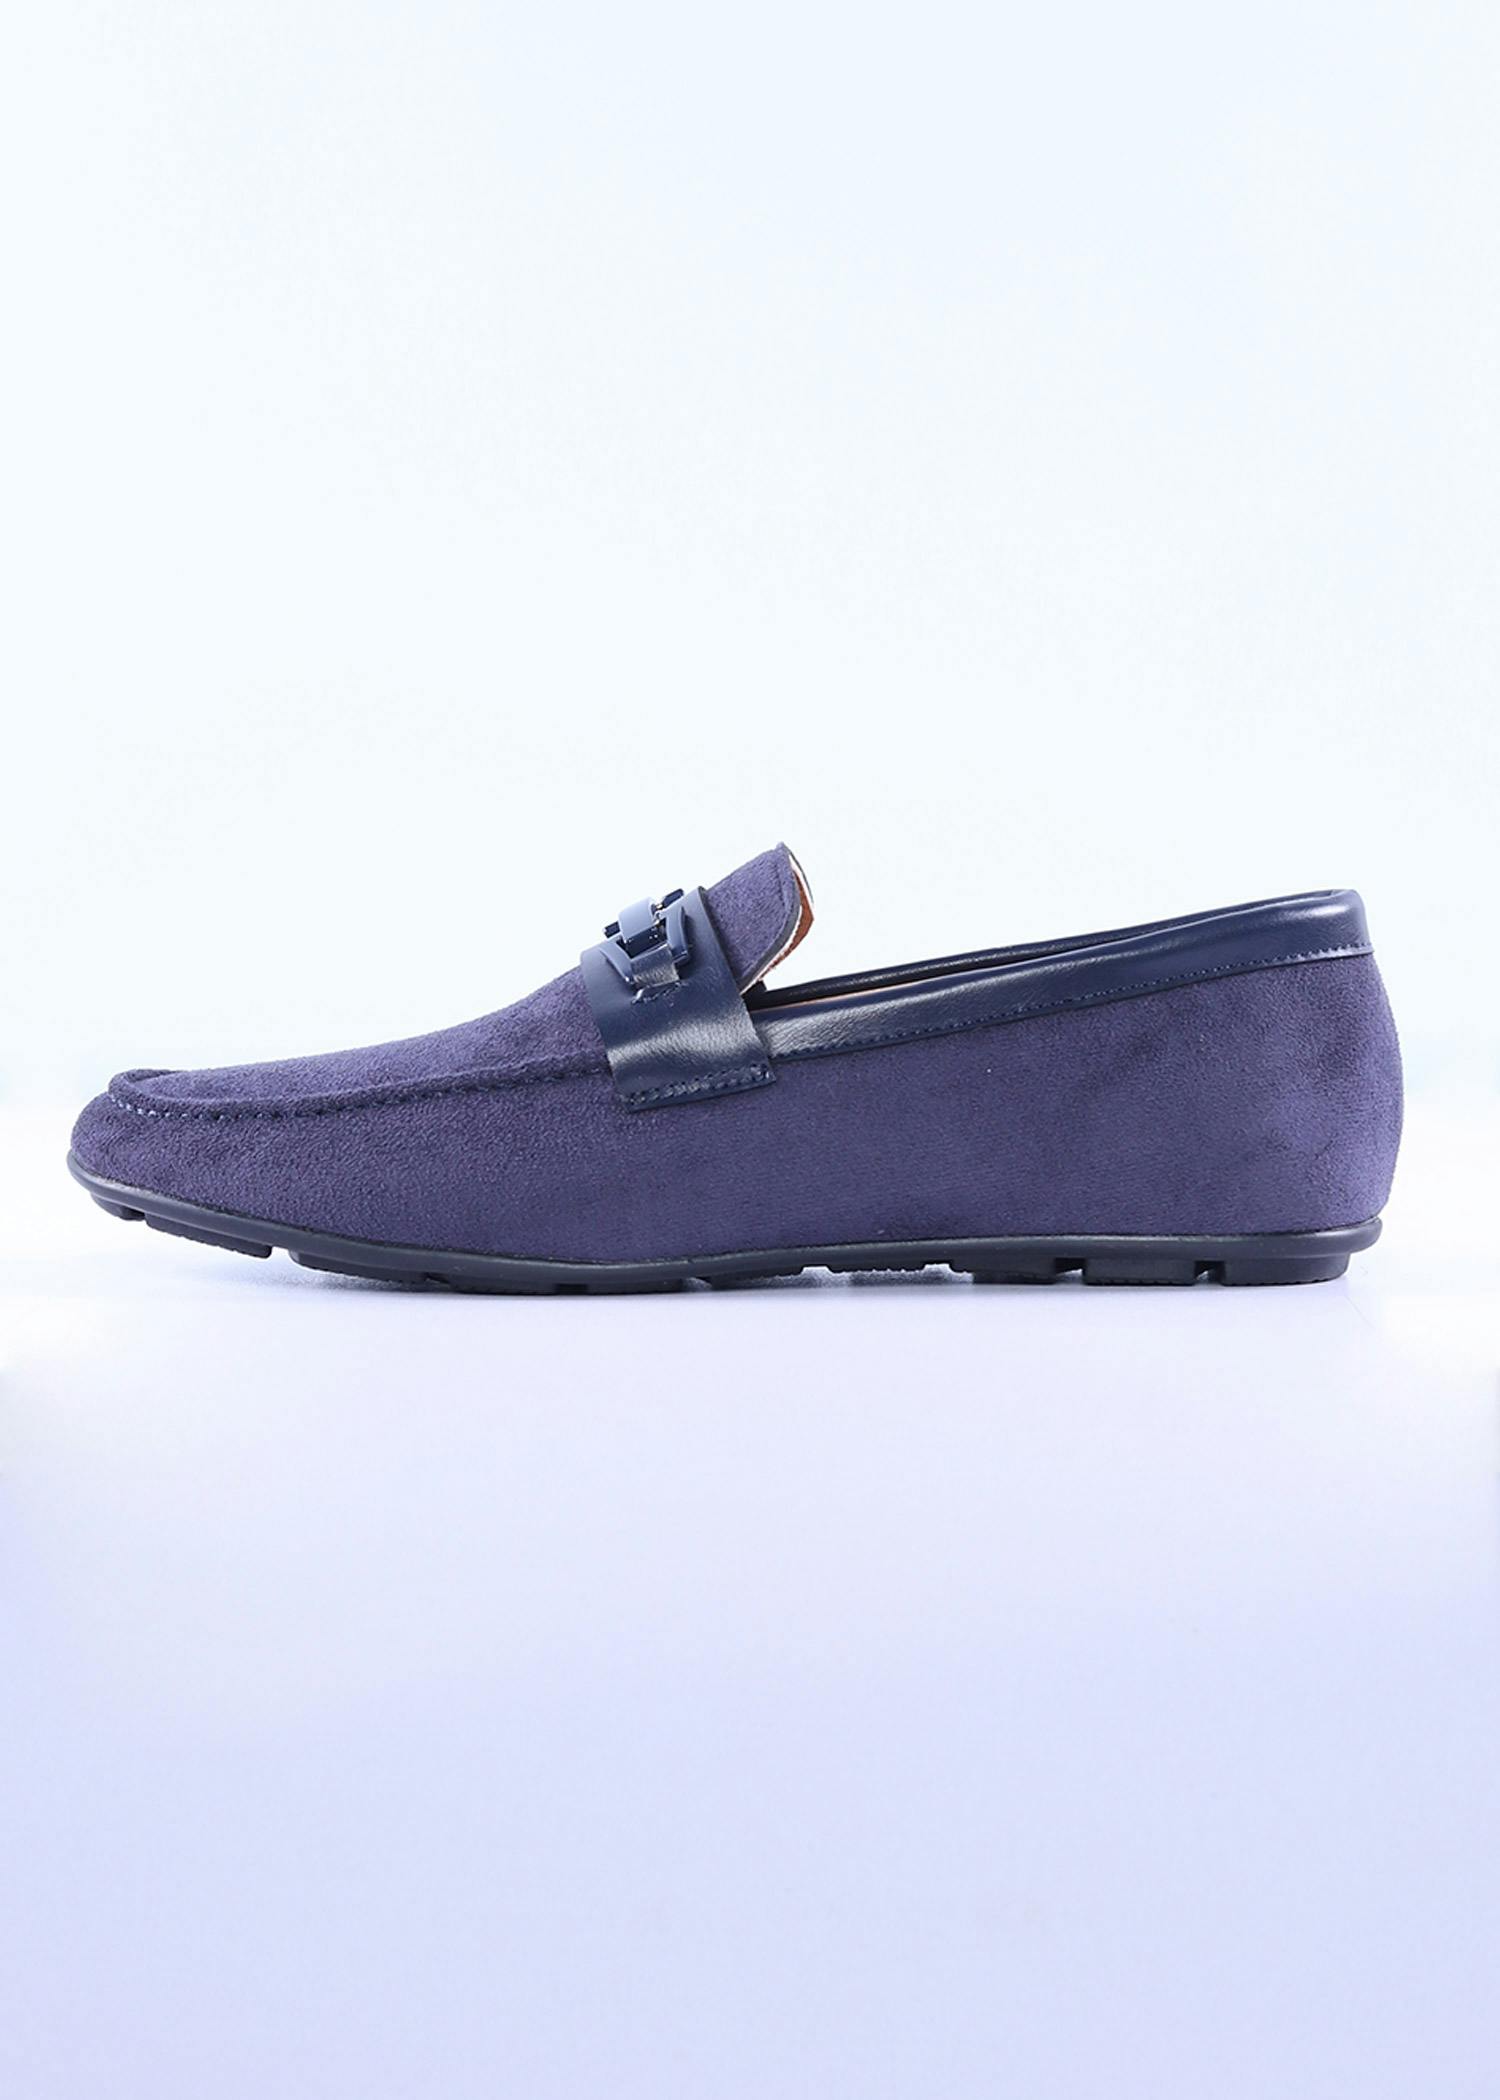 tagus mens shoes navy color cover